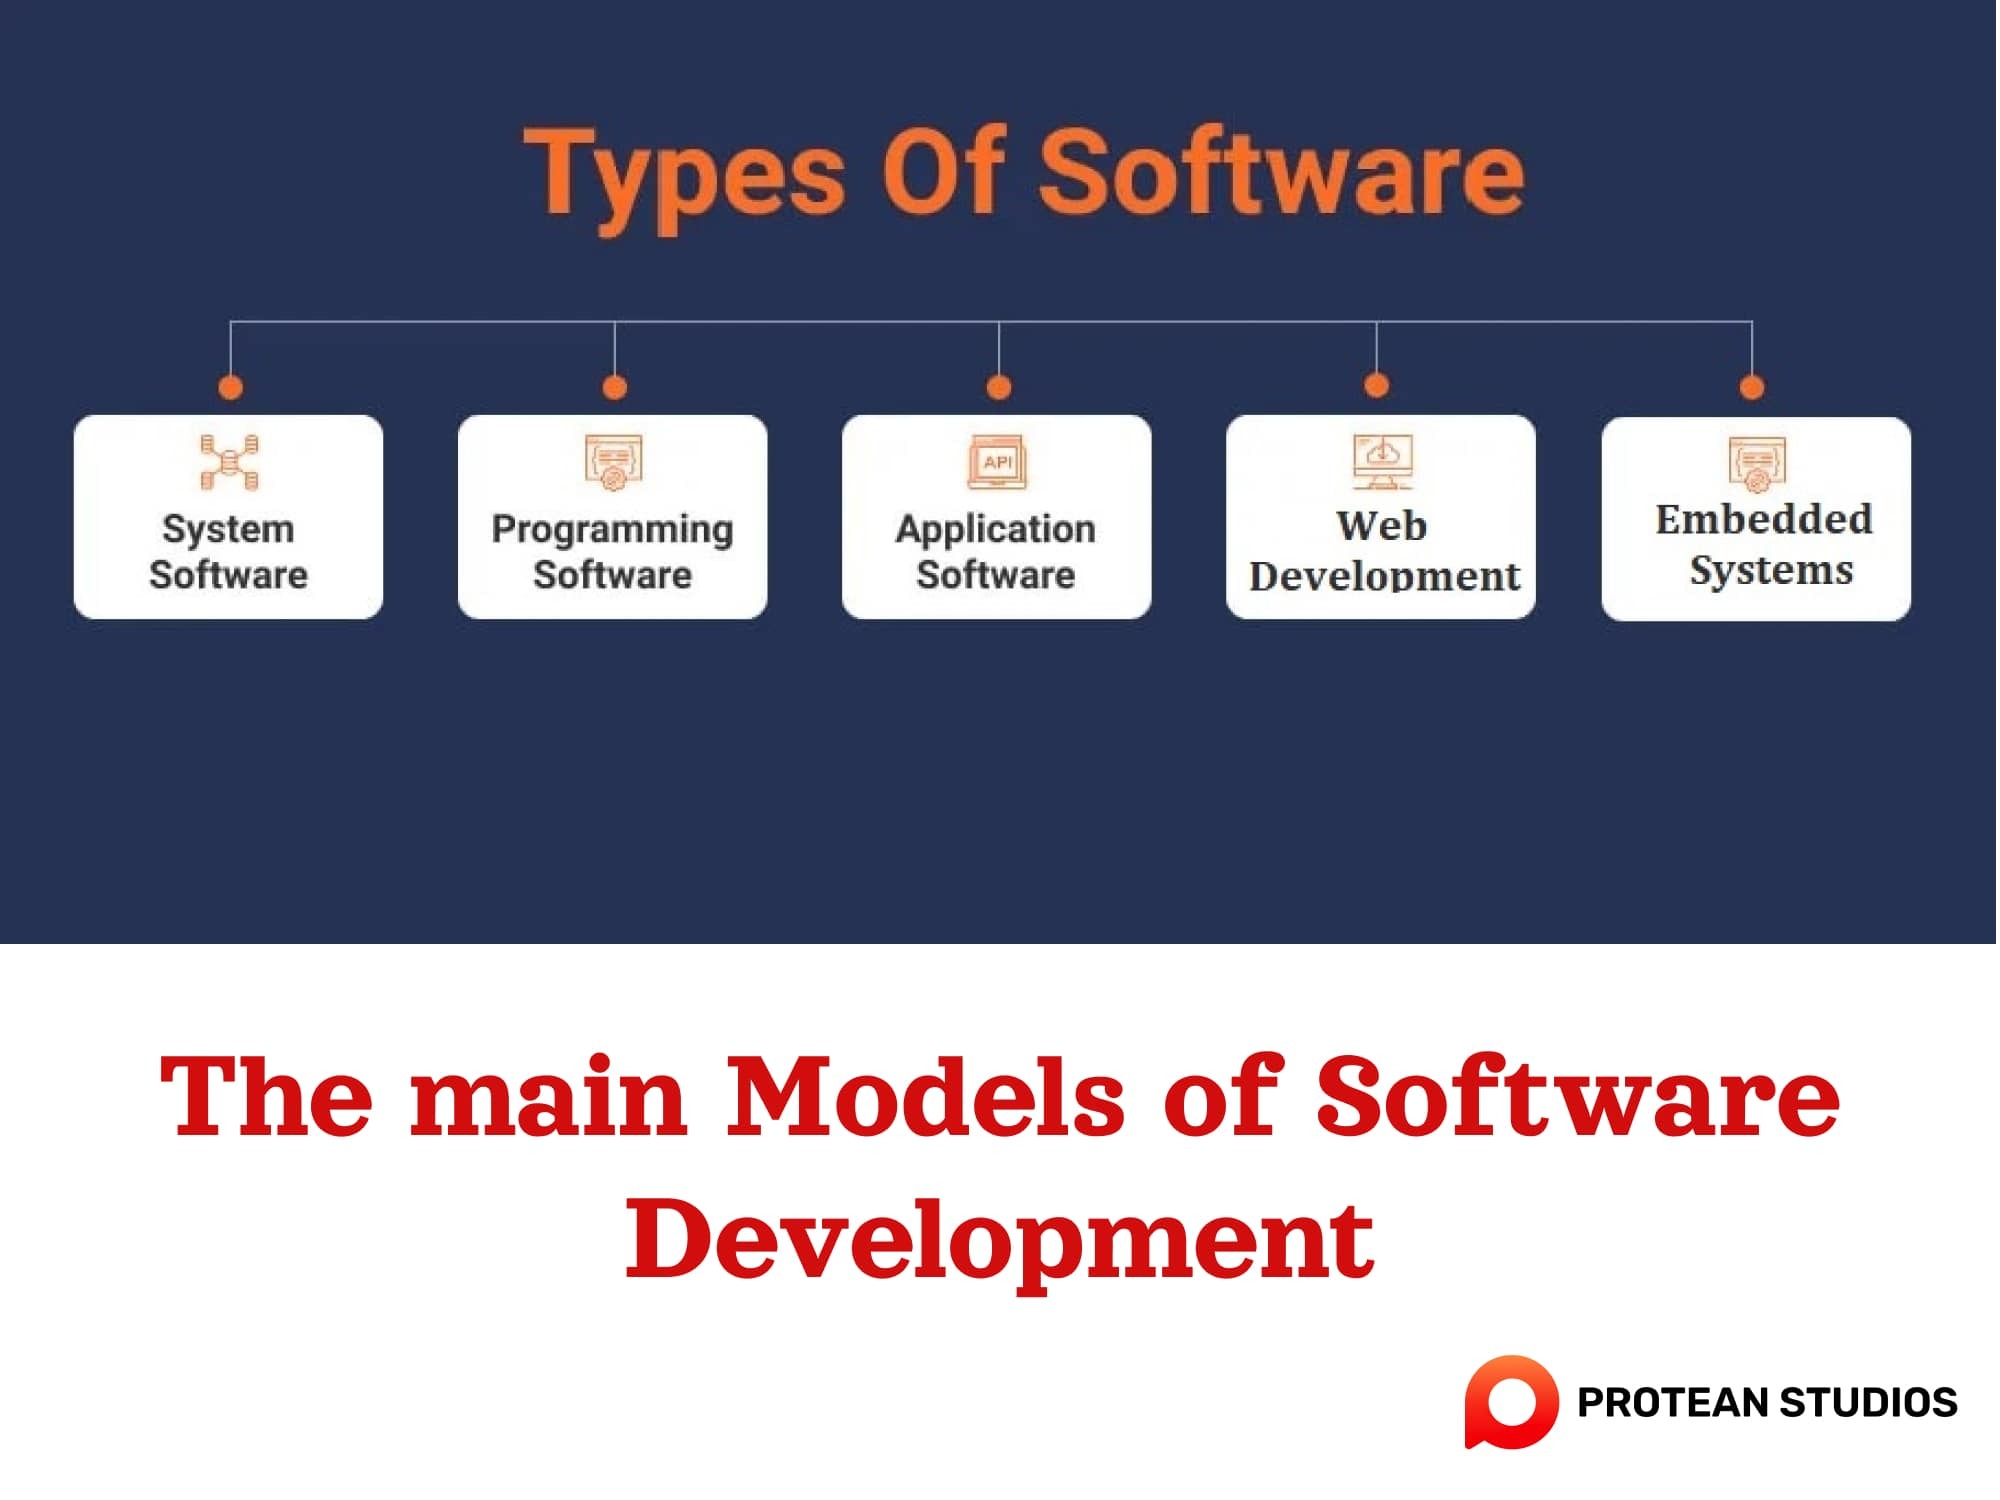 The main types of software development